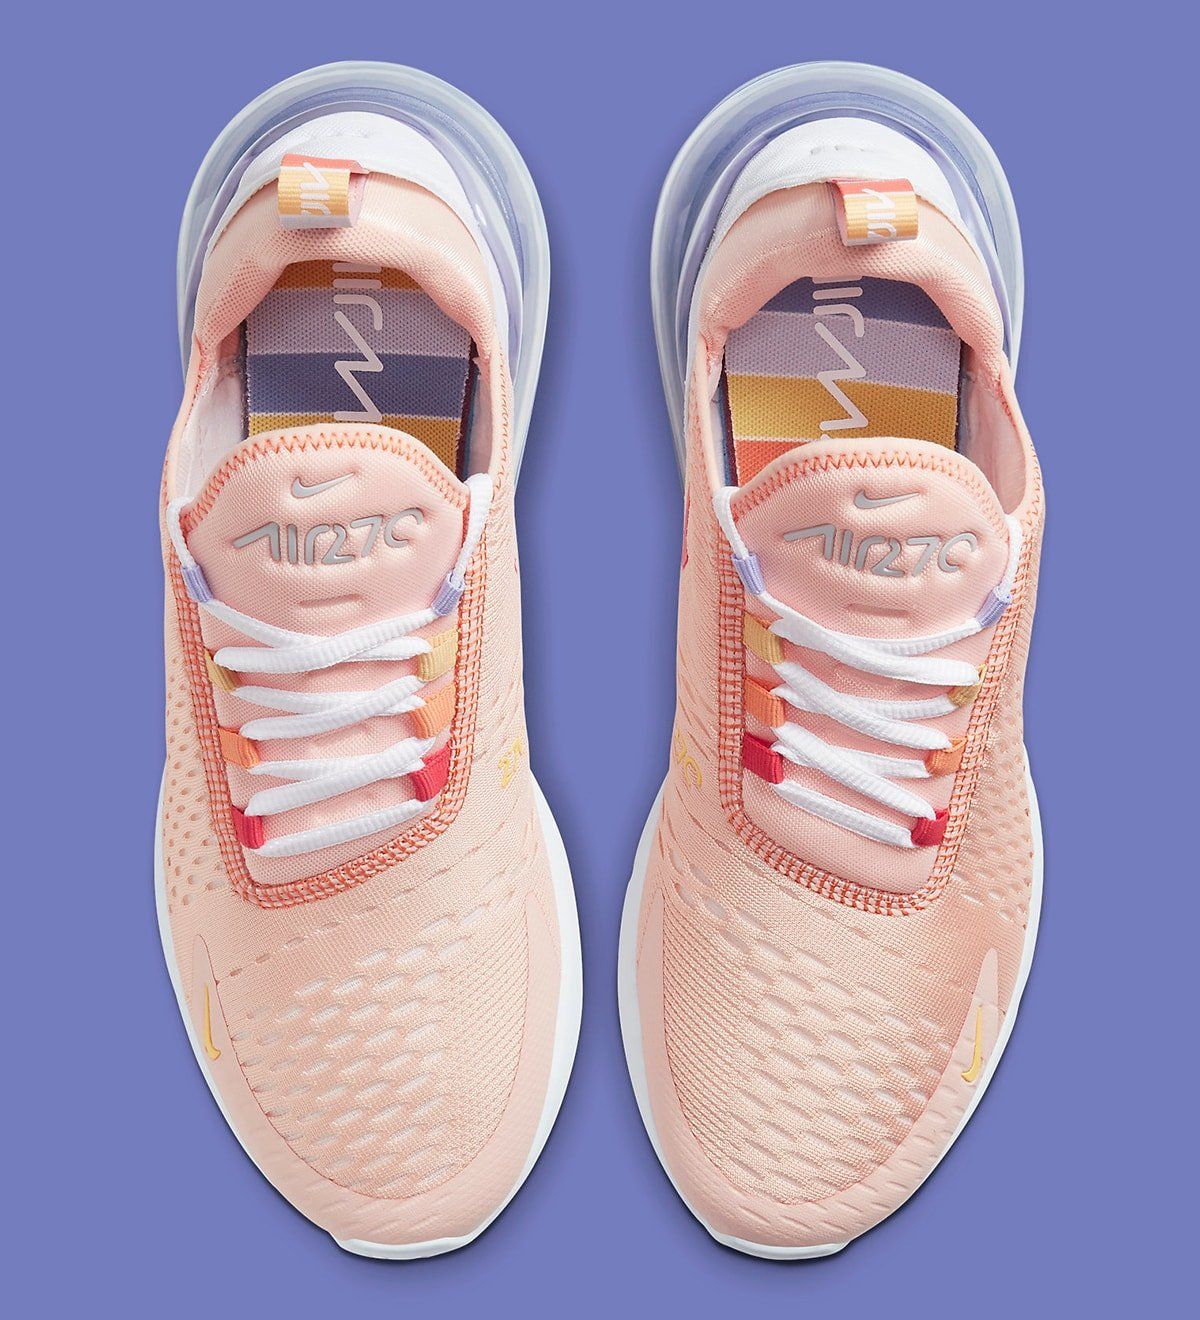 Nike Welcome Easter With Washed Coral Air Max 270 House Of Heat